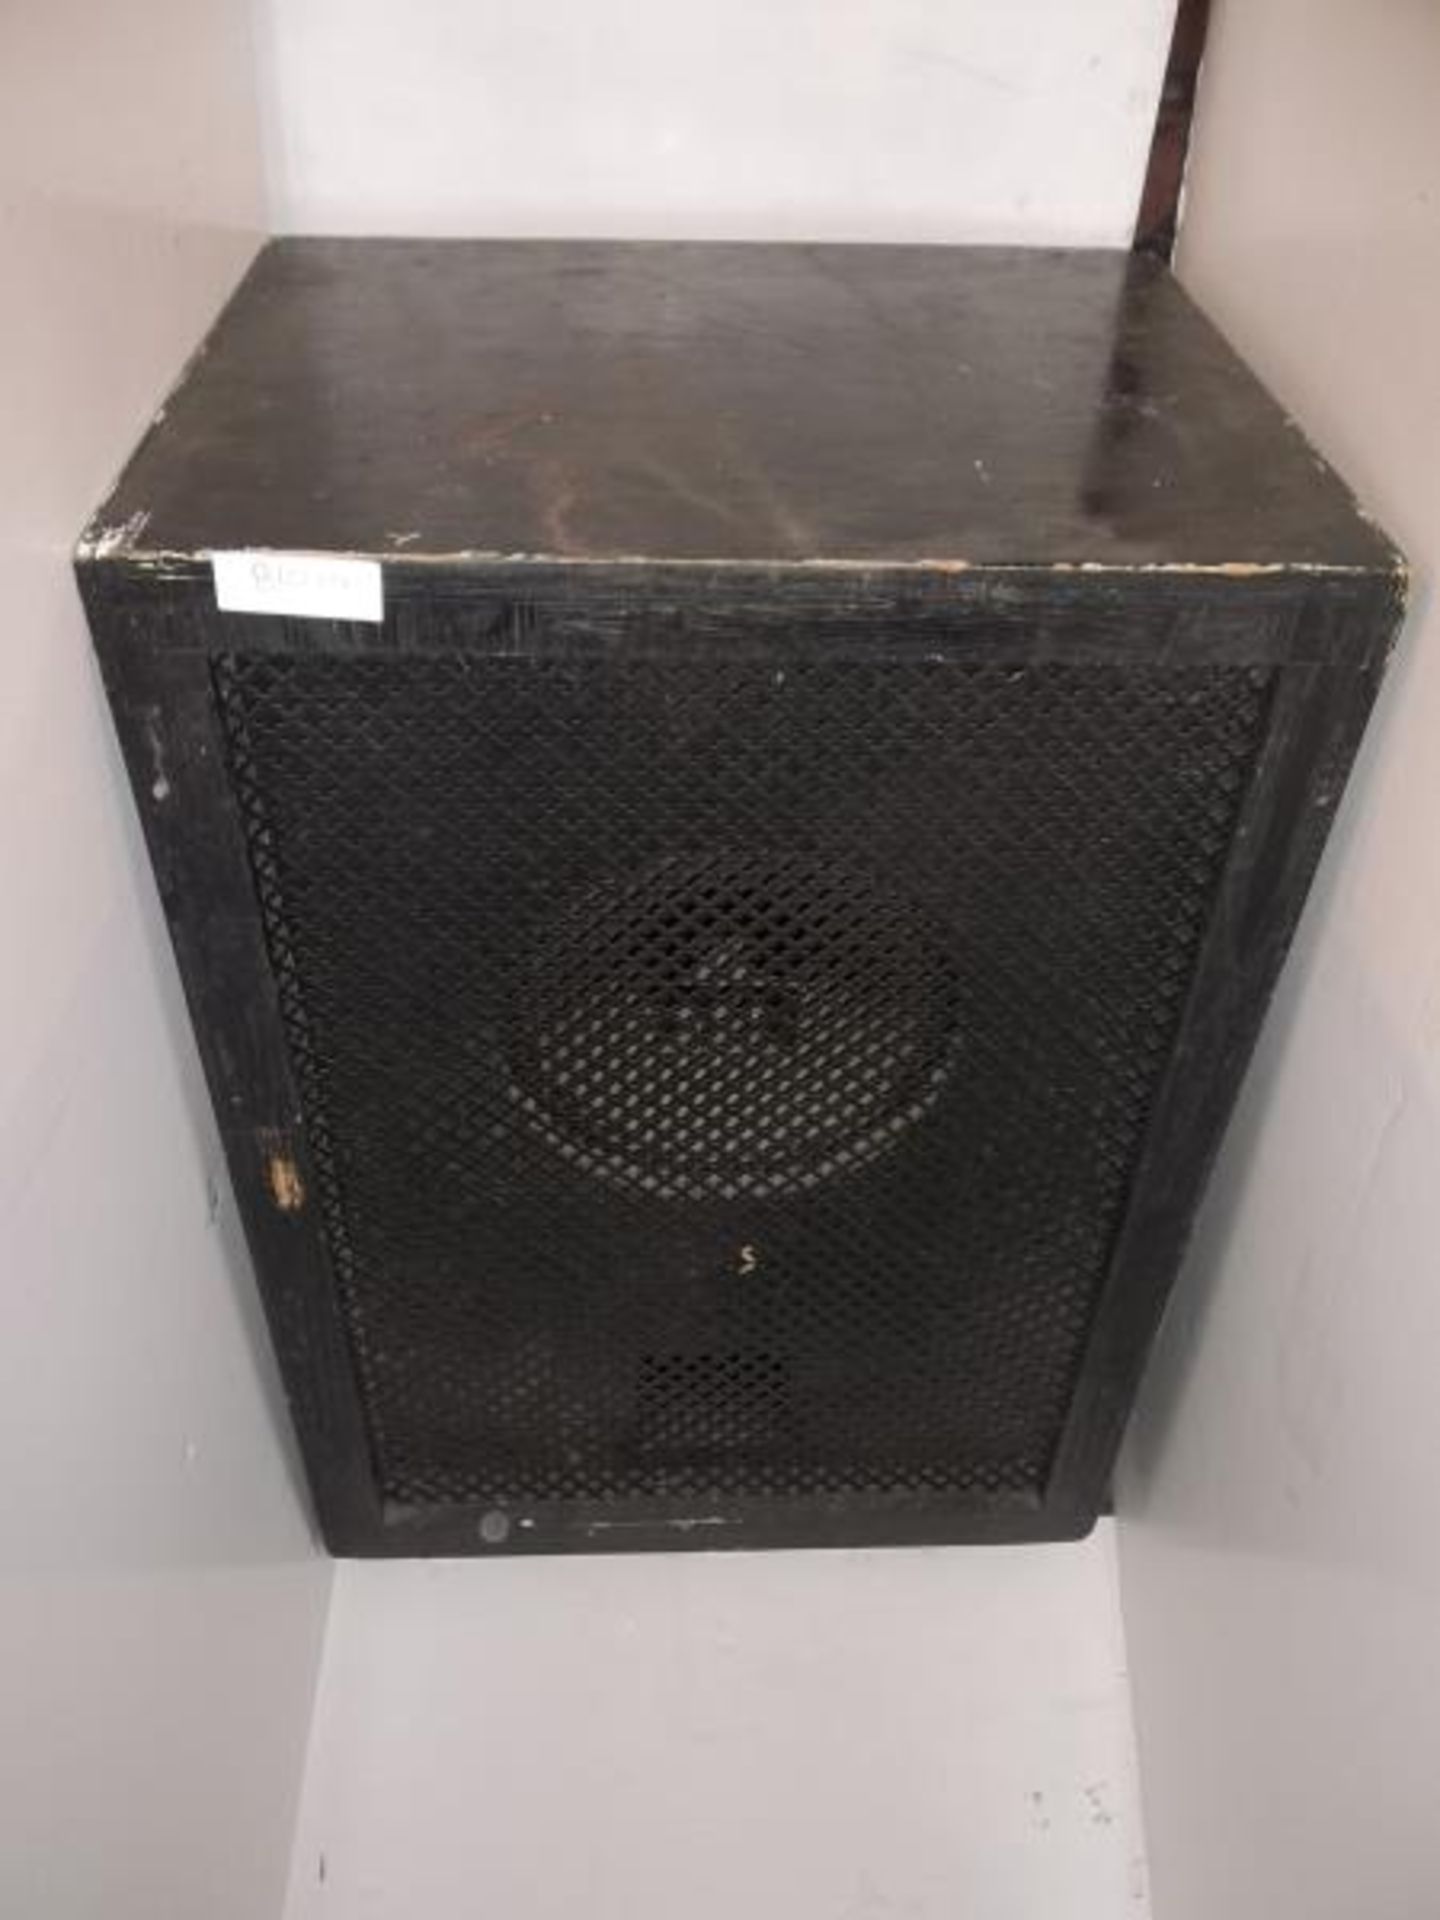 Pair of Altec speaker cabinets, painted black with one speaker in each, some damage to screens and - Image 7 of 12